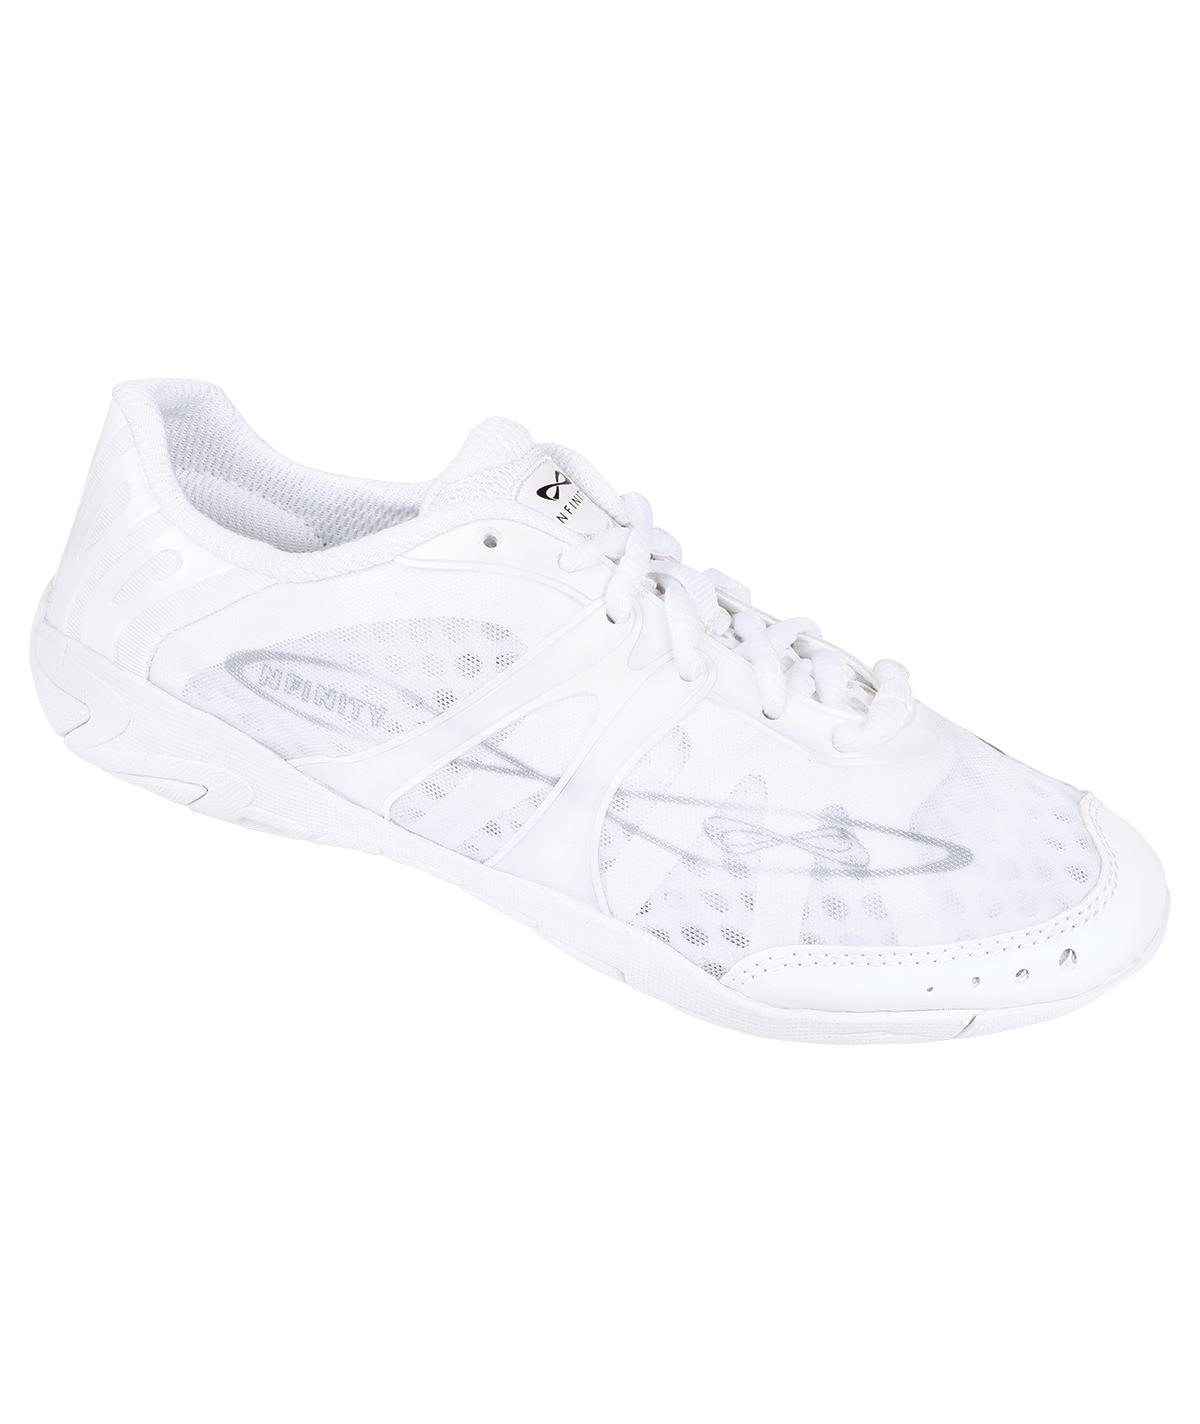 Women & Youth Competition Cheerleading Gear Nfinity Vengeance Cheer Shoe 